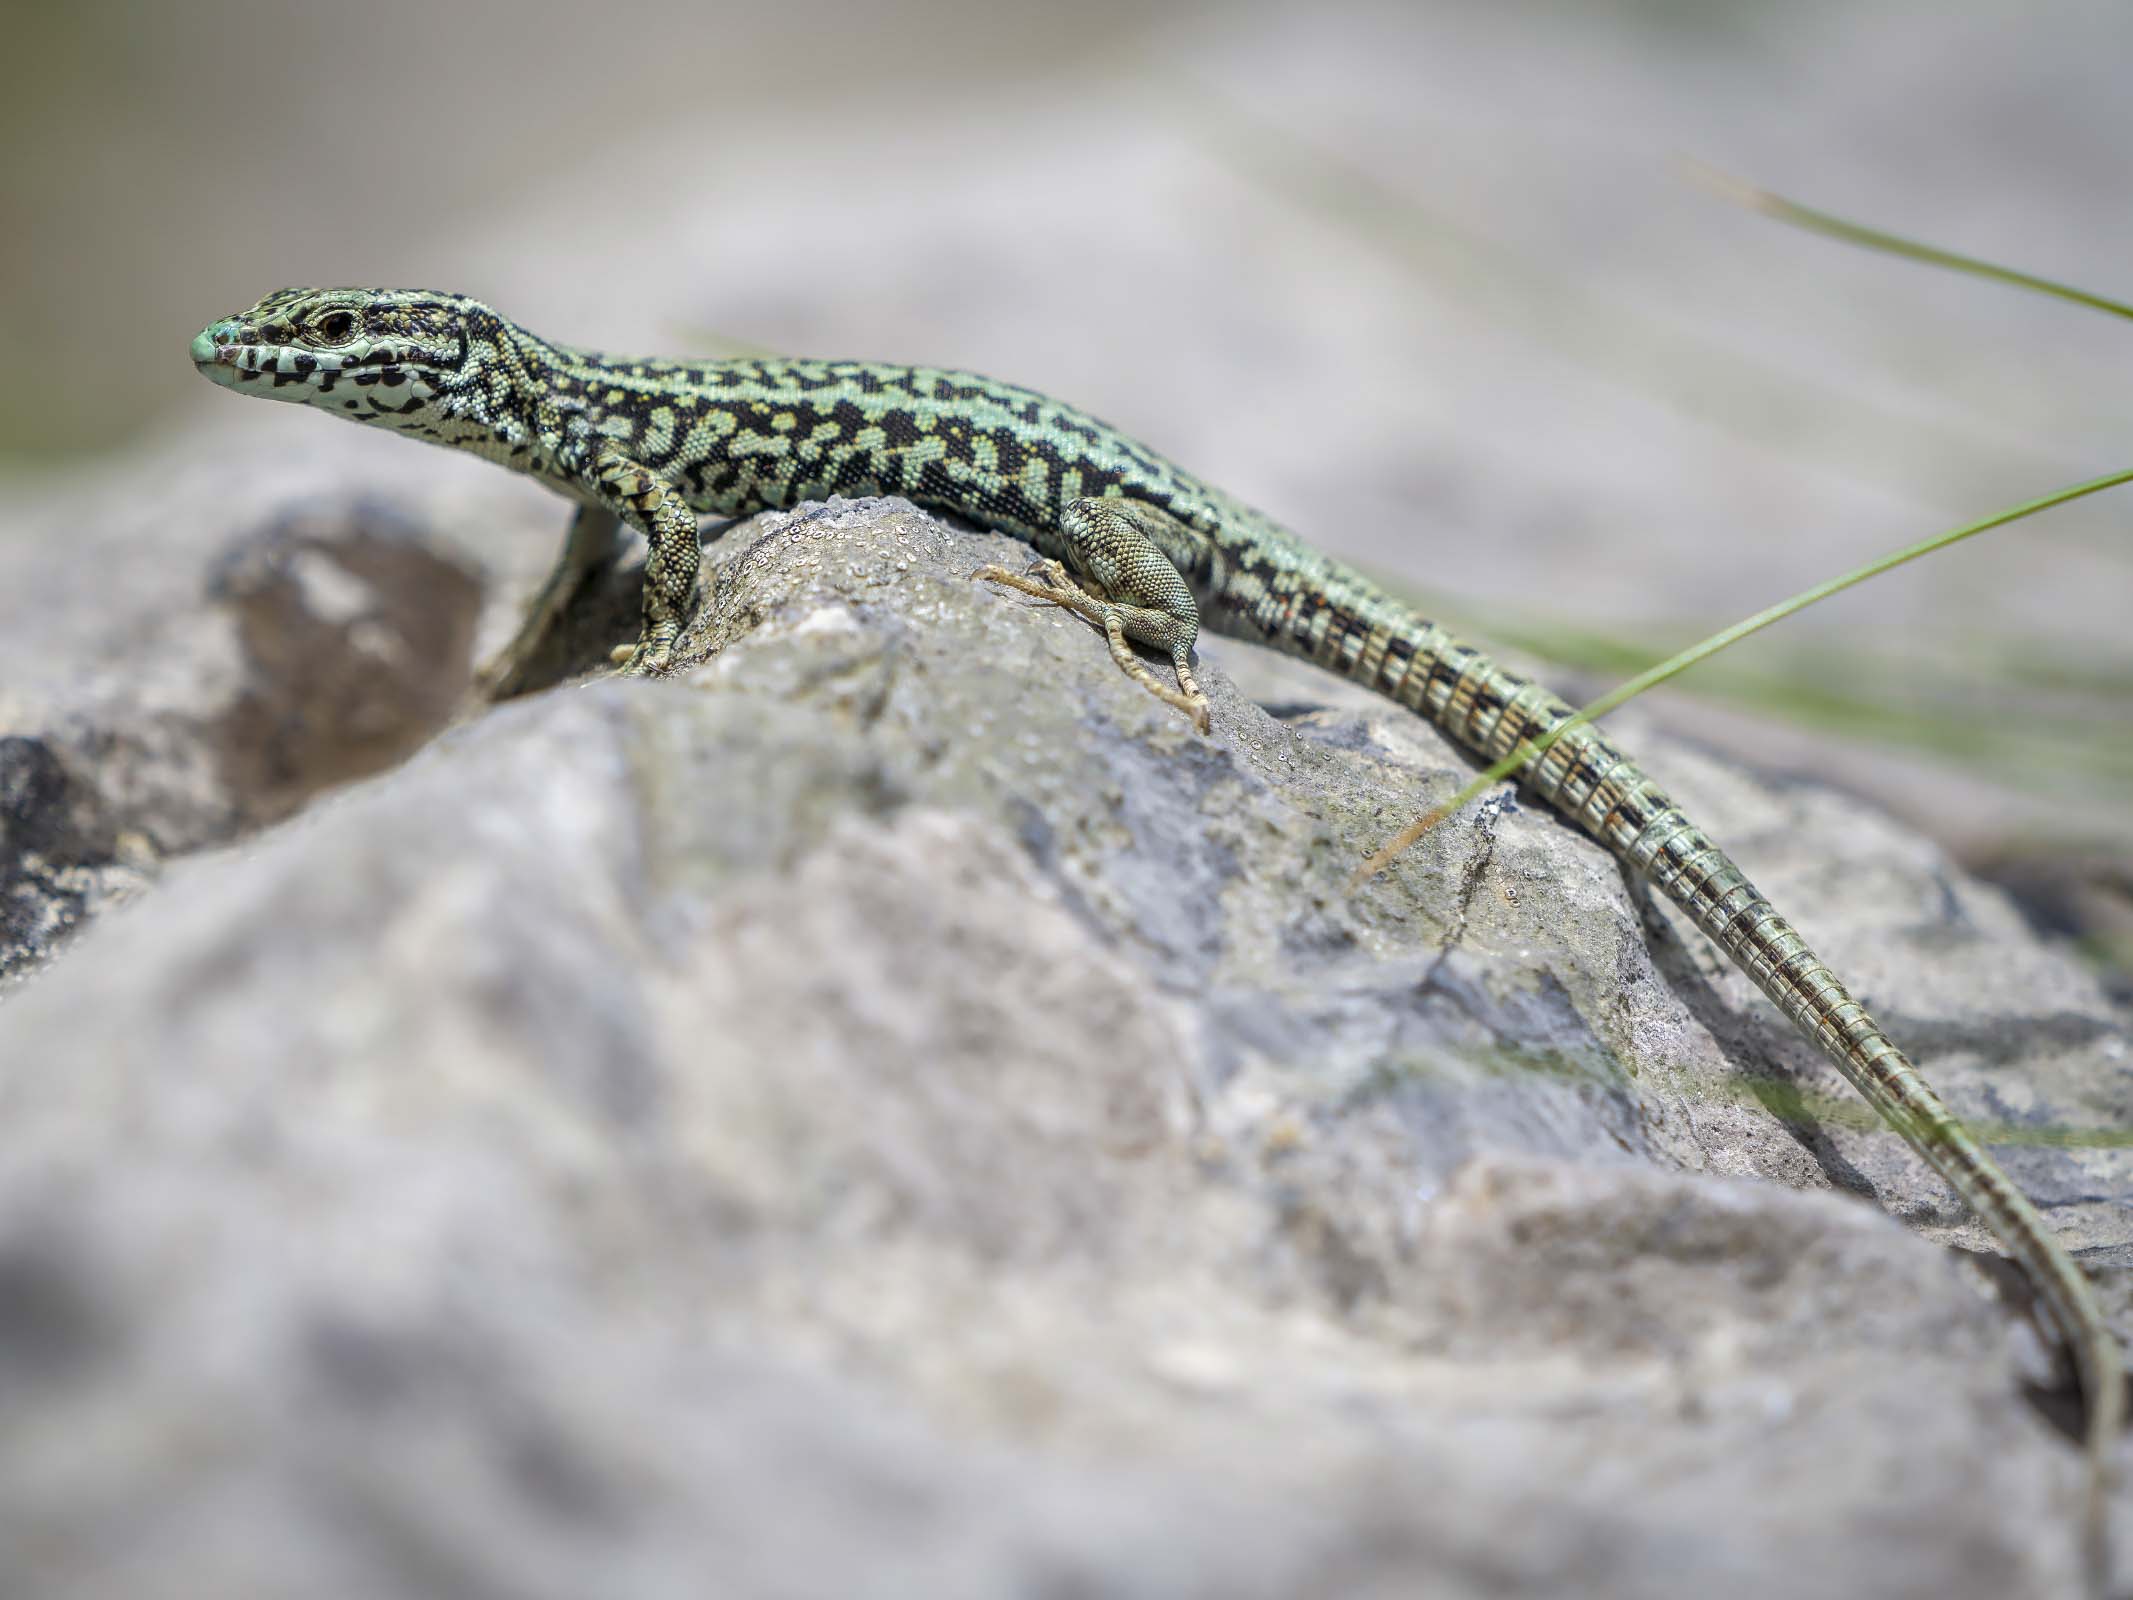 Lizard from the Pyrenees